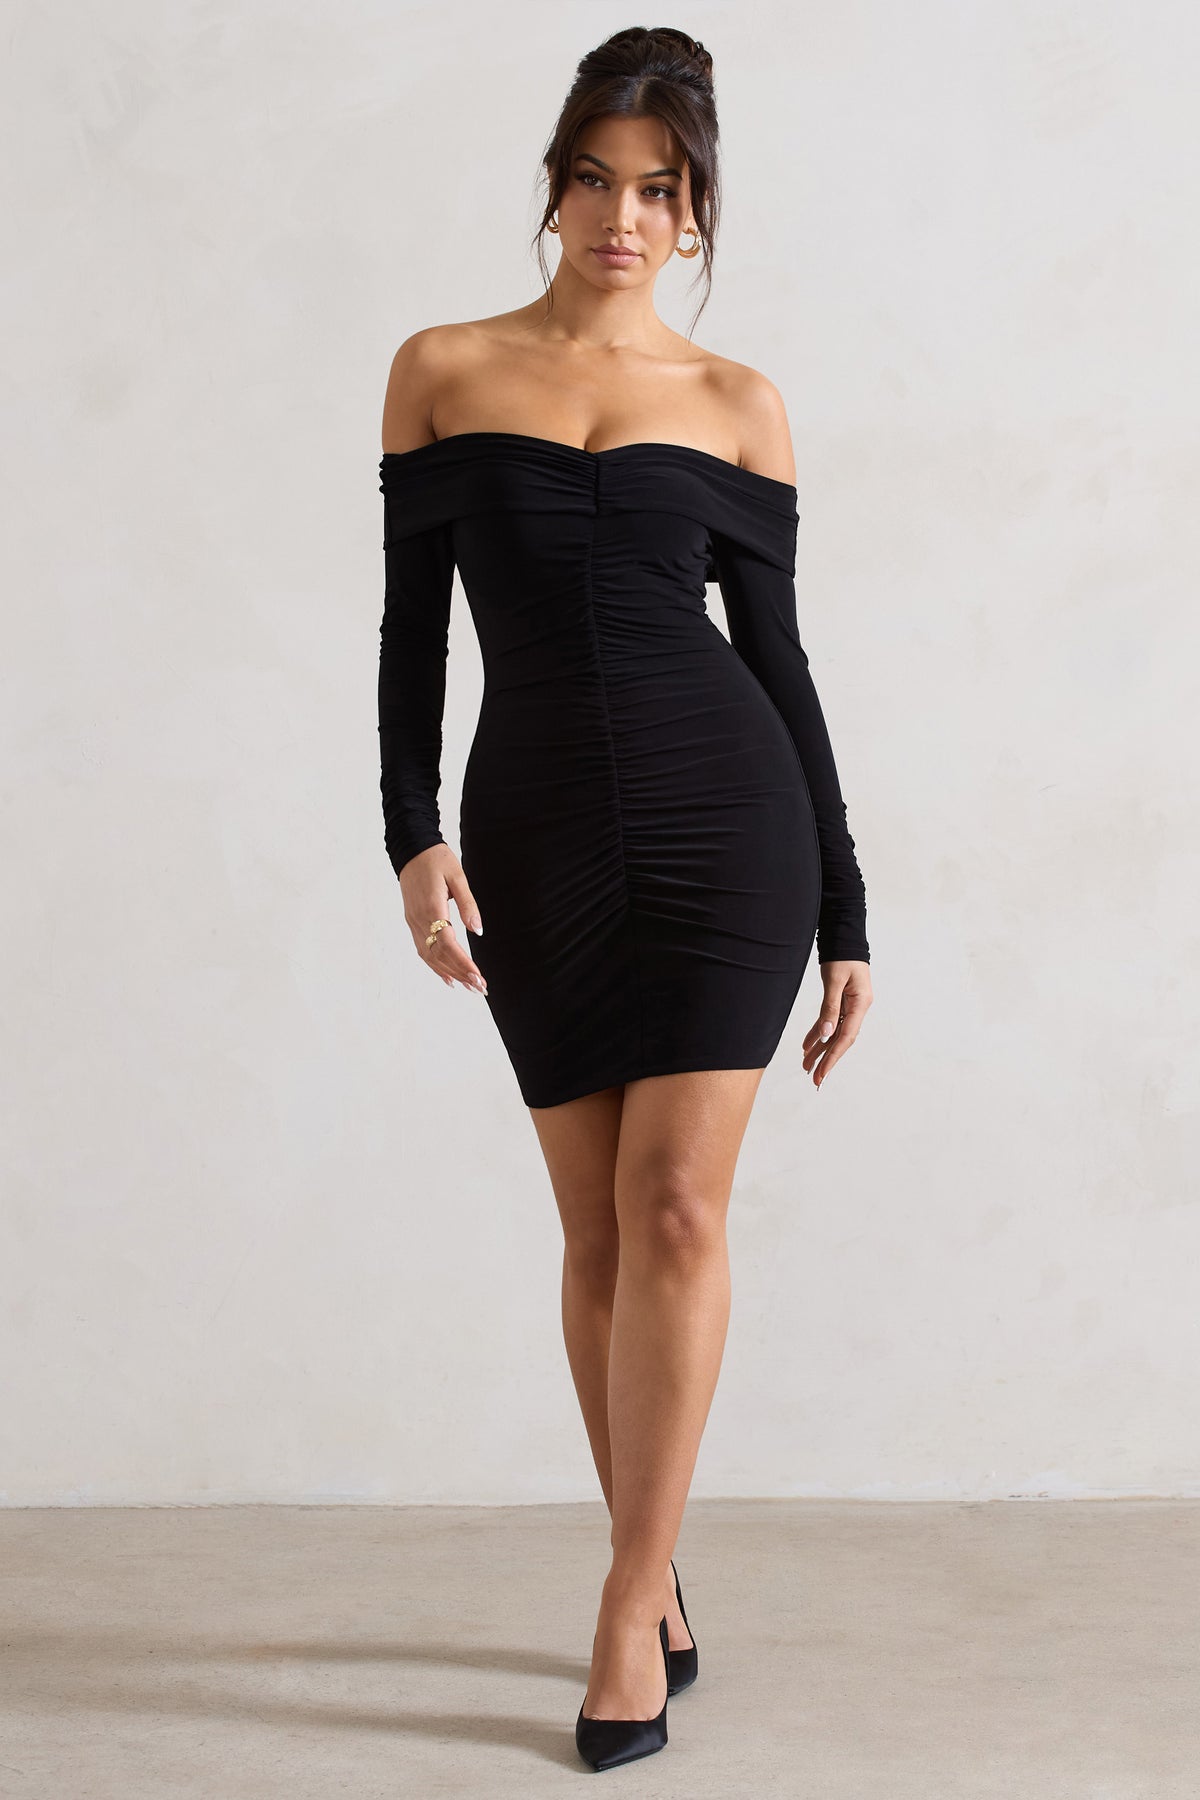 Snatched in Black Dress | Bodied by Breon